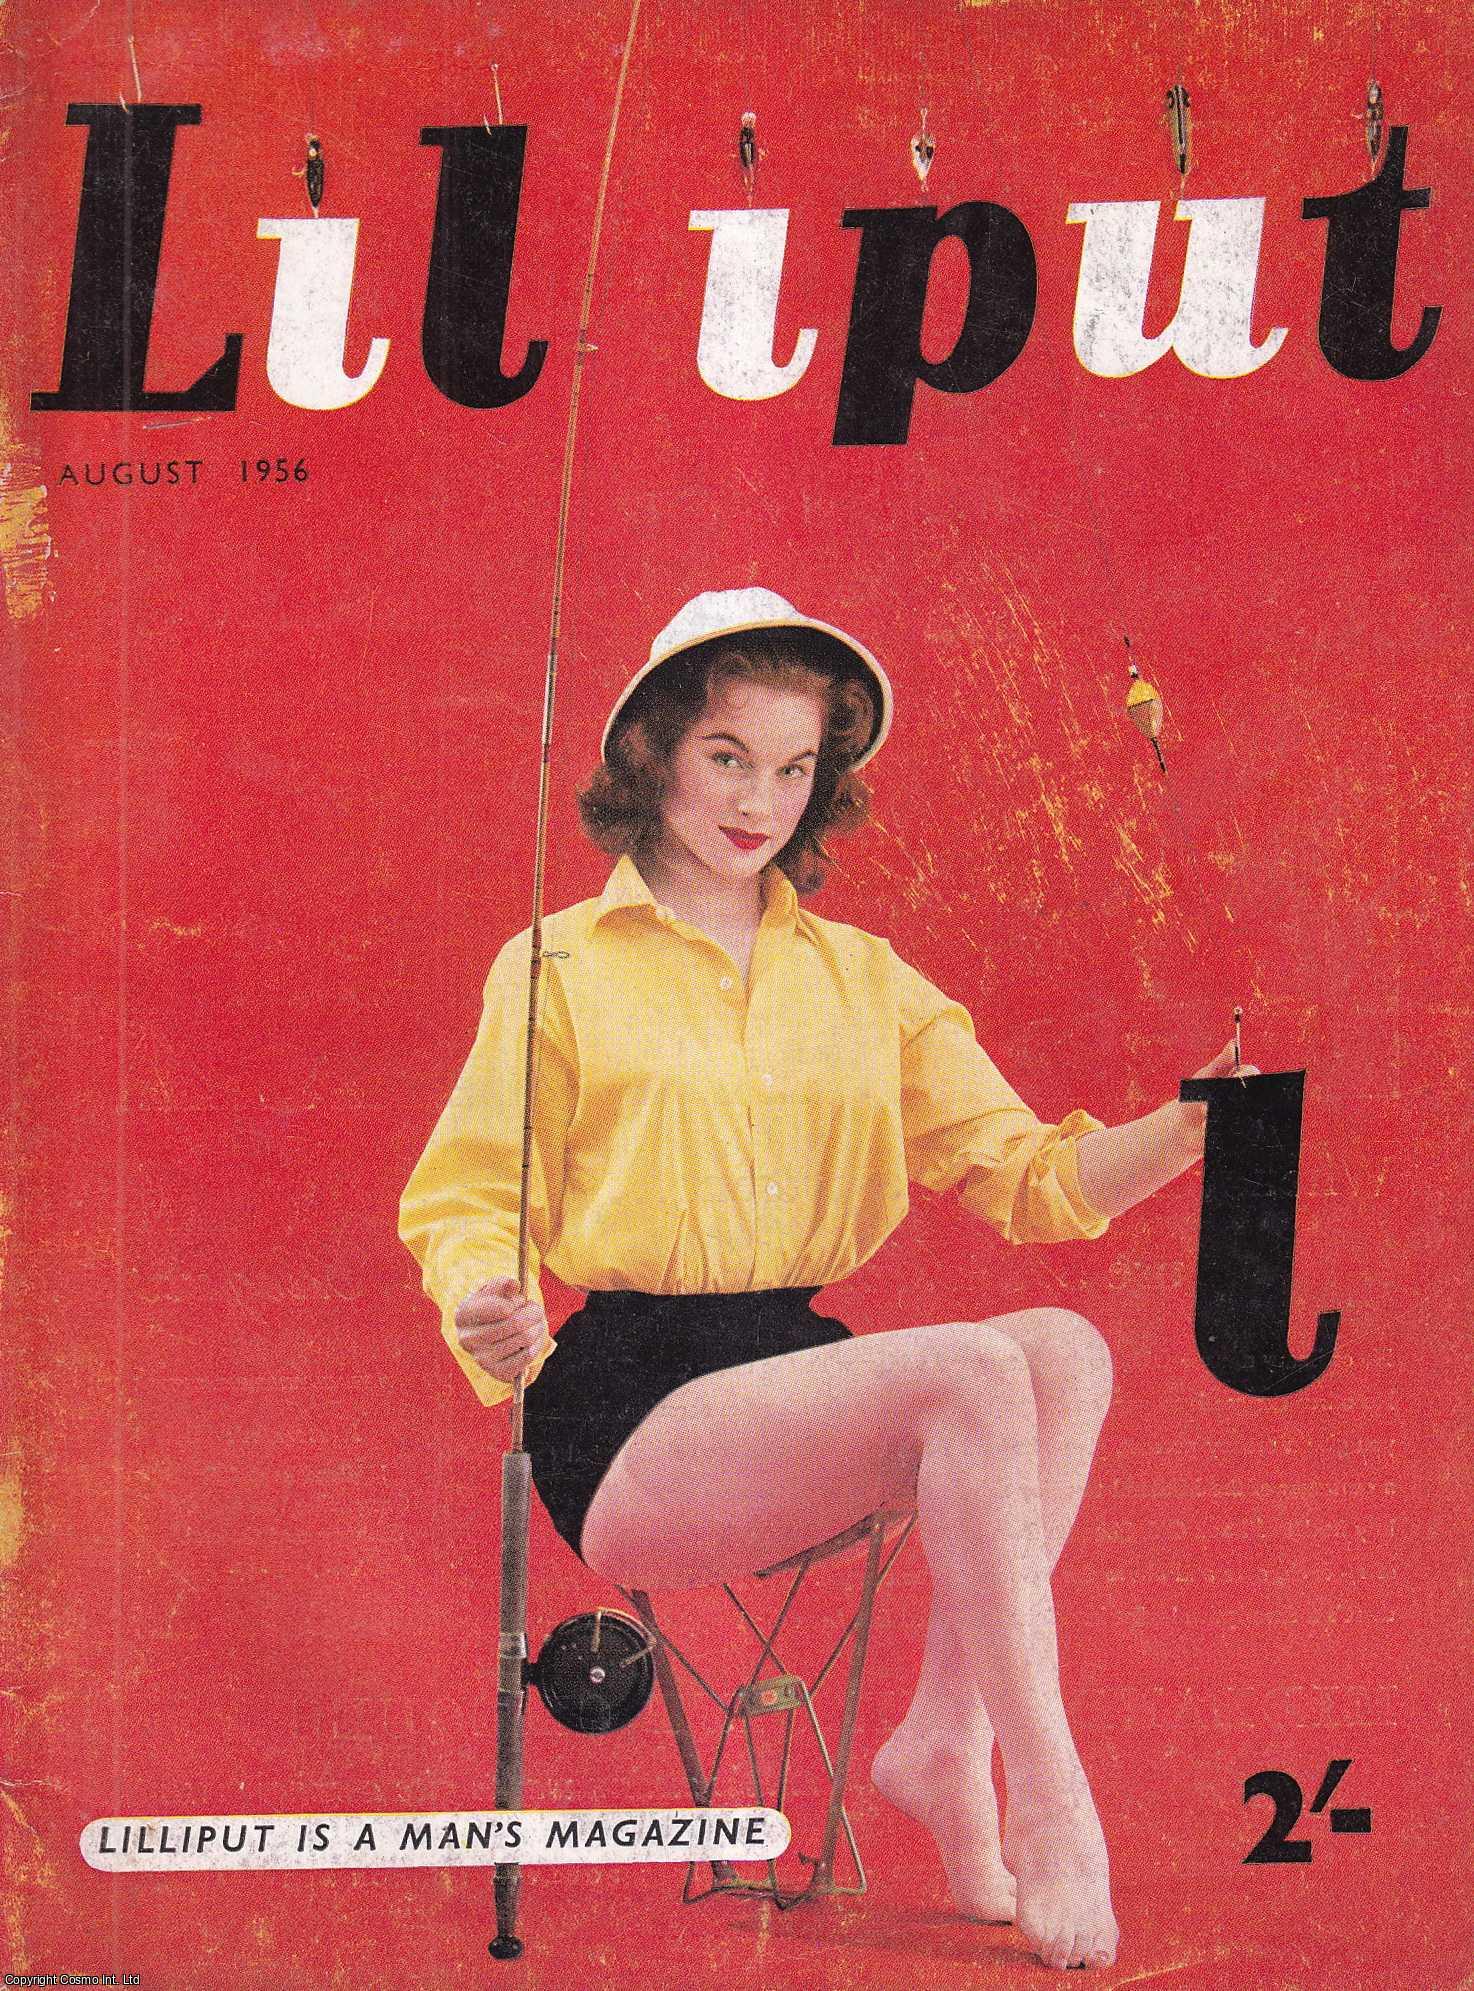 Lilliput - Lilliput Magazine. August 1956. Vol.39 no.2 Issue no.230. Charles Raven story, Jayne Mansfield photographs, Malcolm Monteith article, and other pieces.